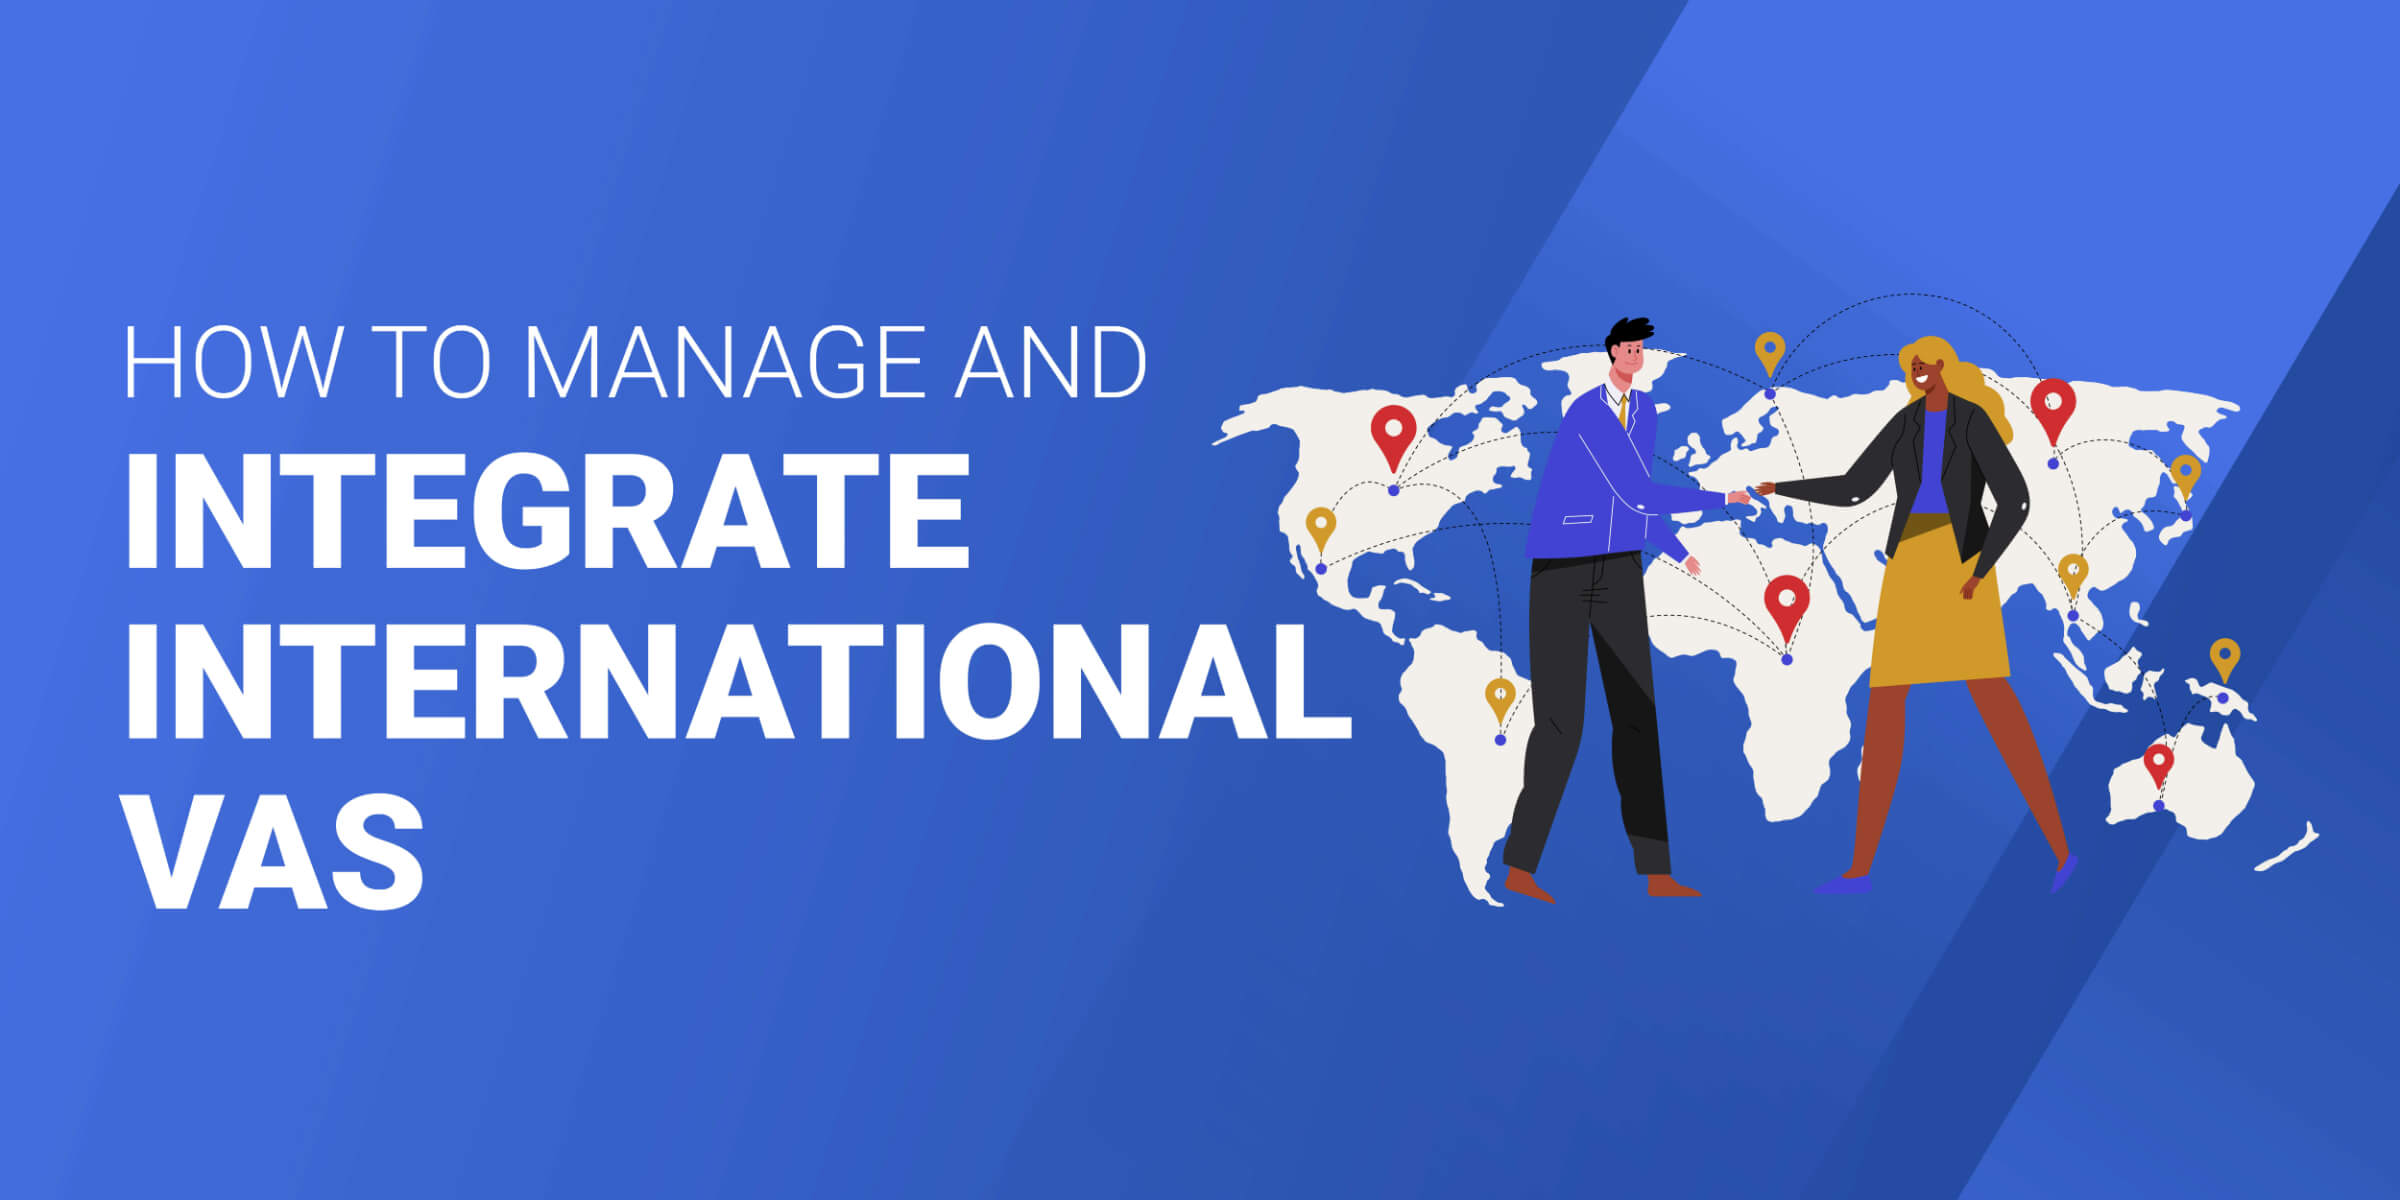 How to Manage and Integrate International VAs